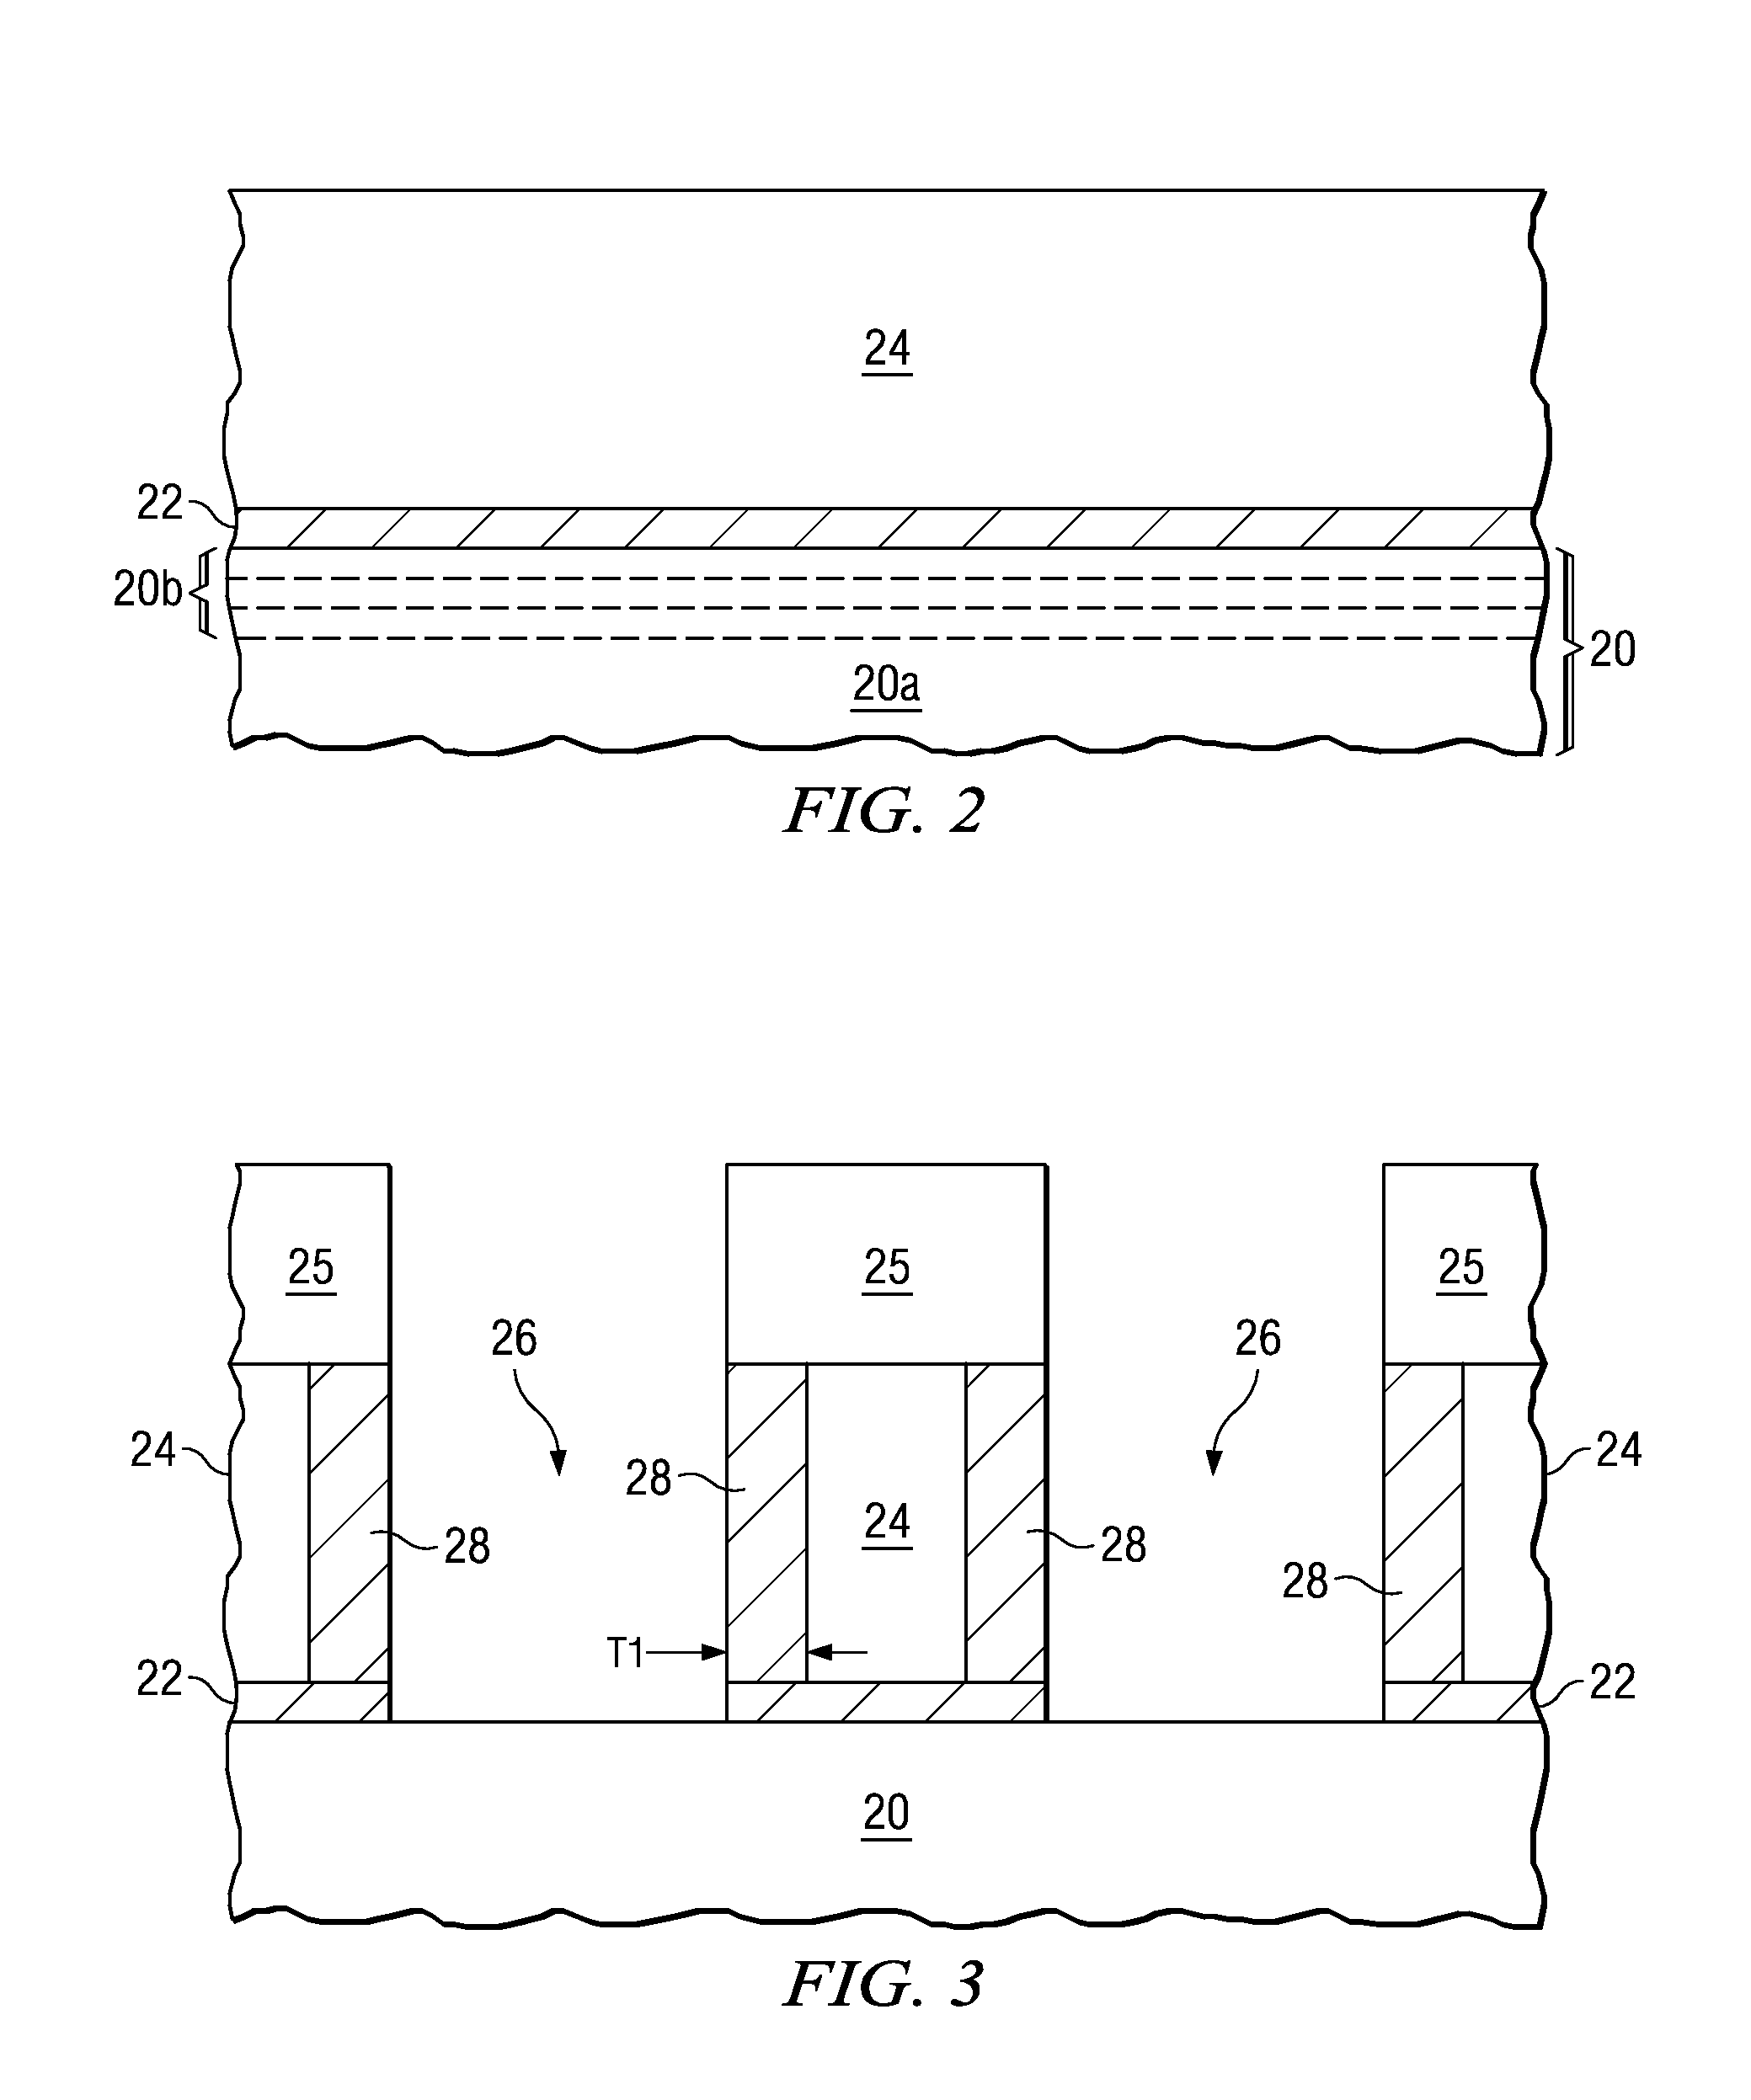 Solving Via-Misalignment Issues in Interconnect Structures Having Air-Gaps